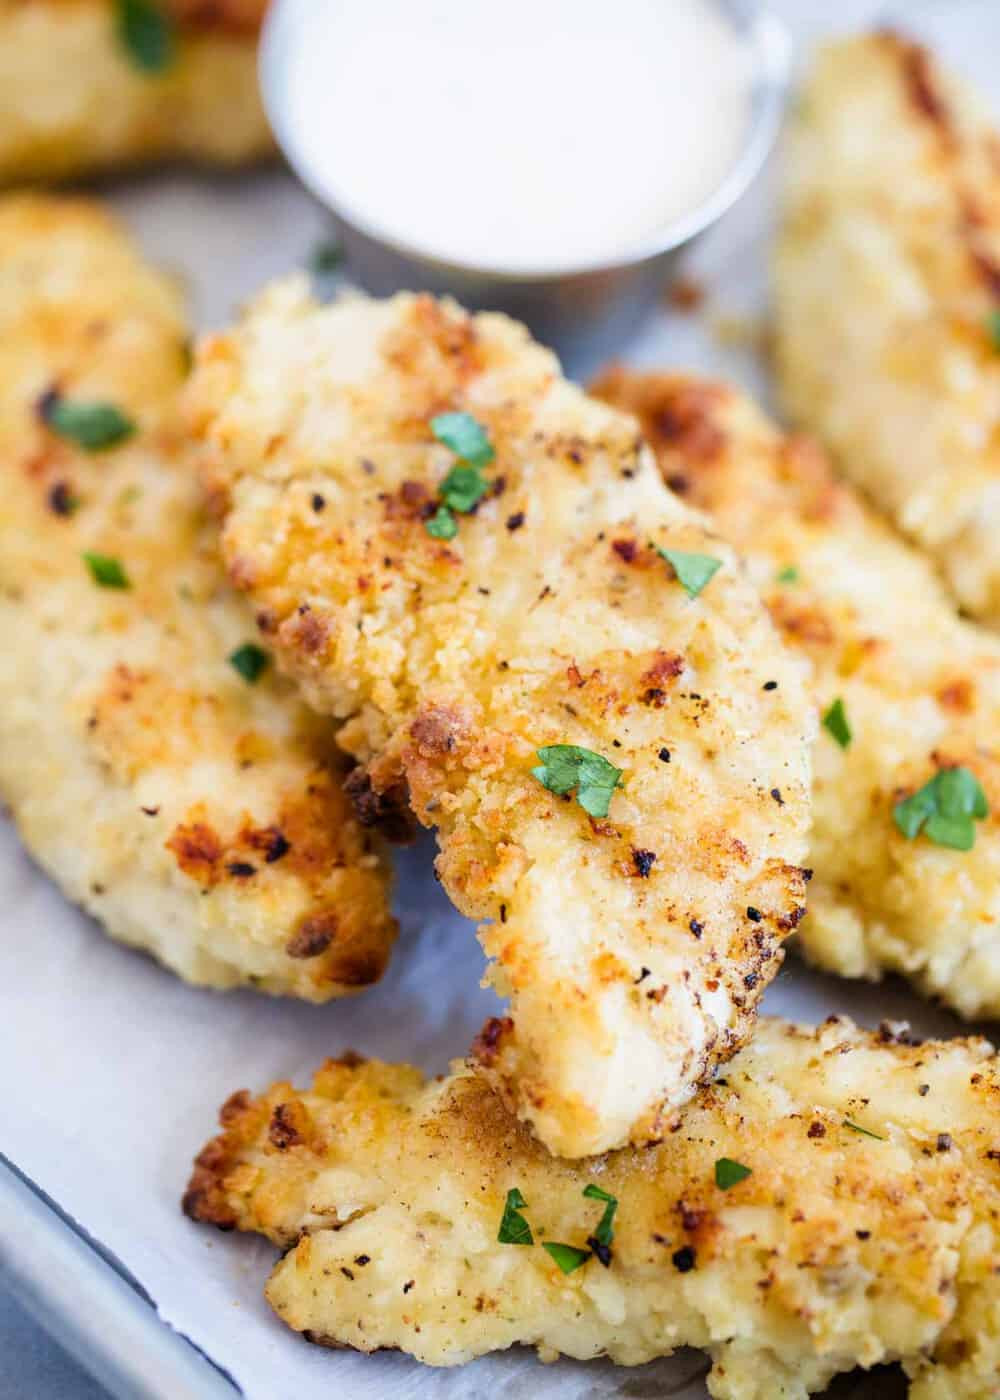 Recipes With Chicken Tenders
 EASY Baked Chicken Tenders ready in 30 minutes I